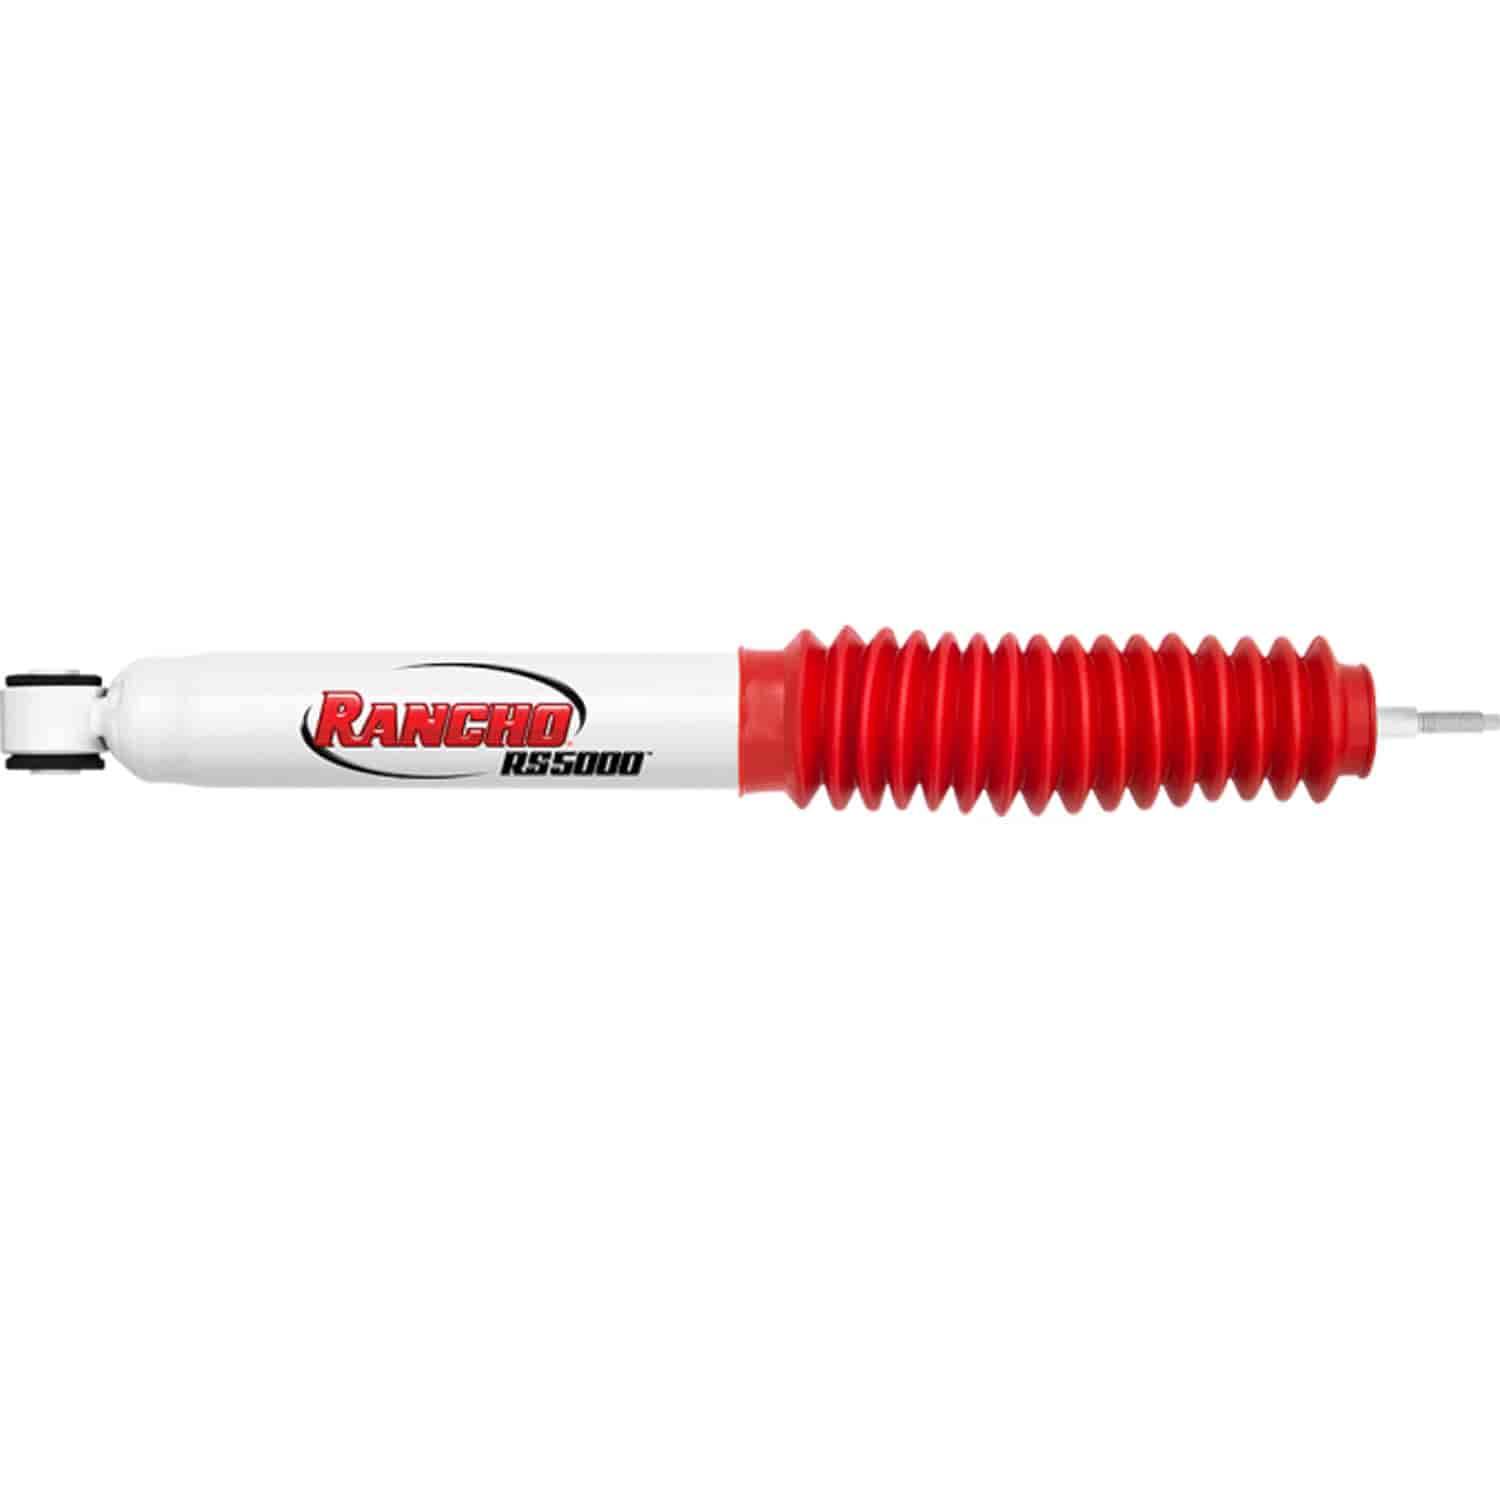 RS5000 Rear Shock Absorber Fits Ford F150/F250